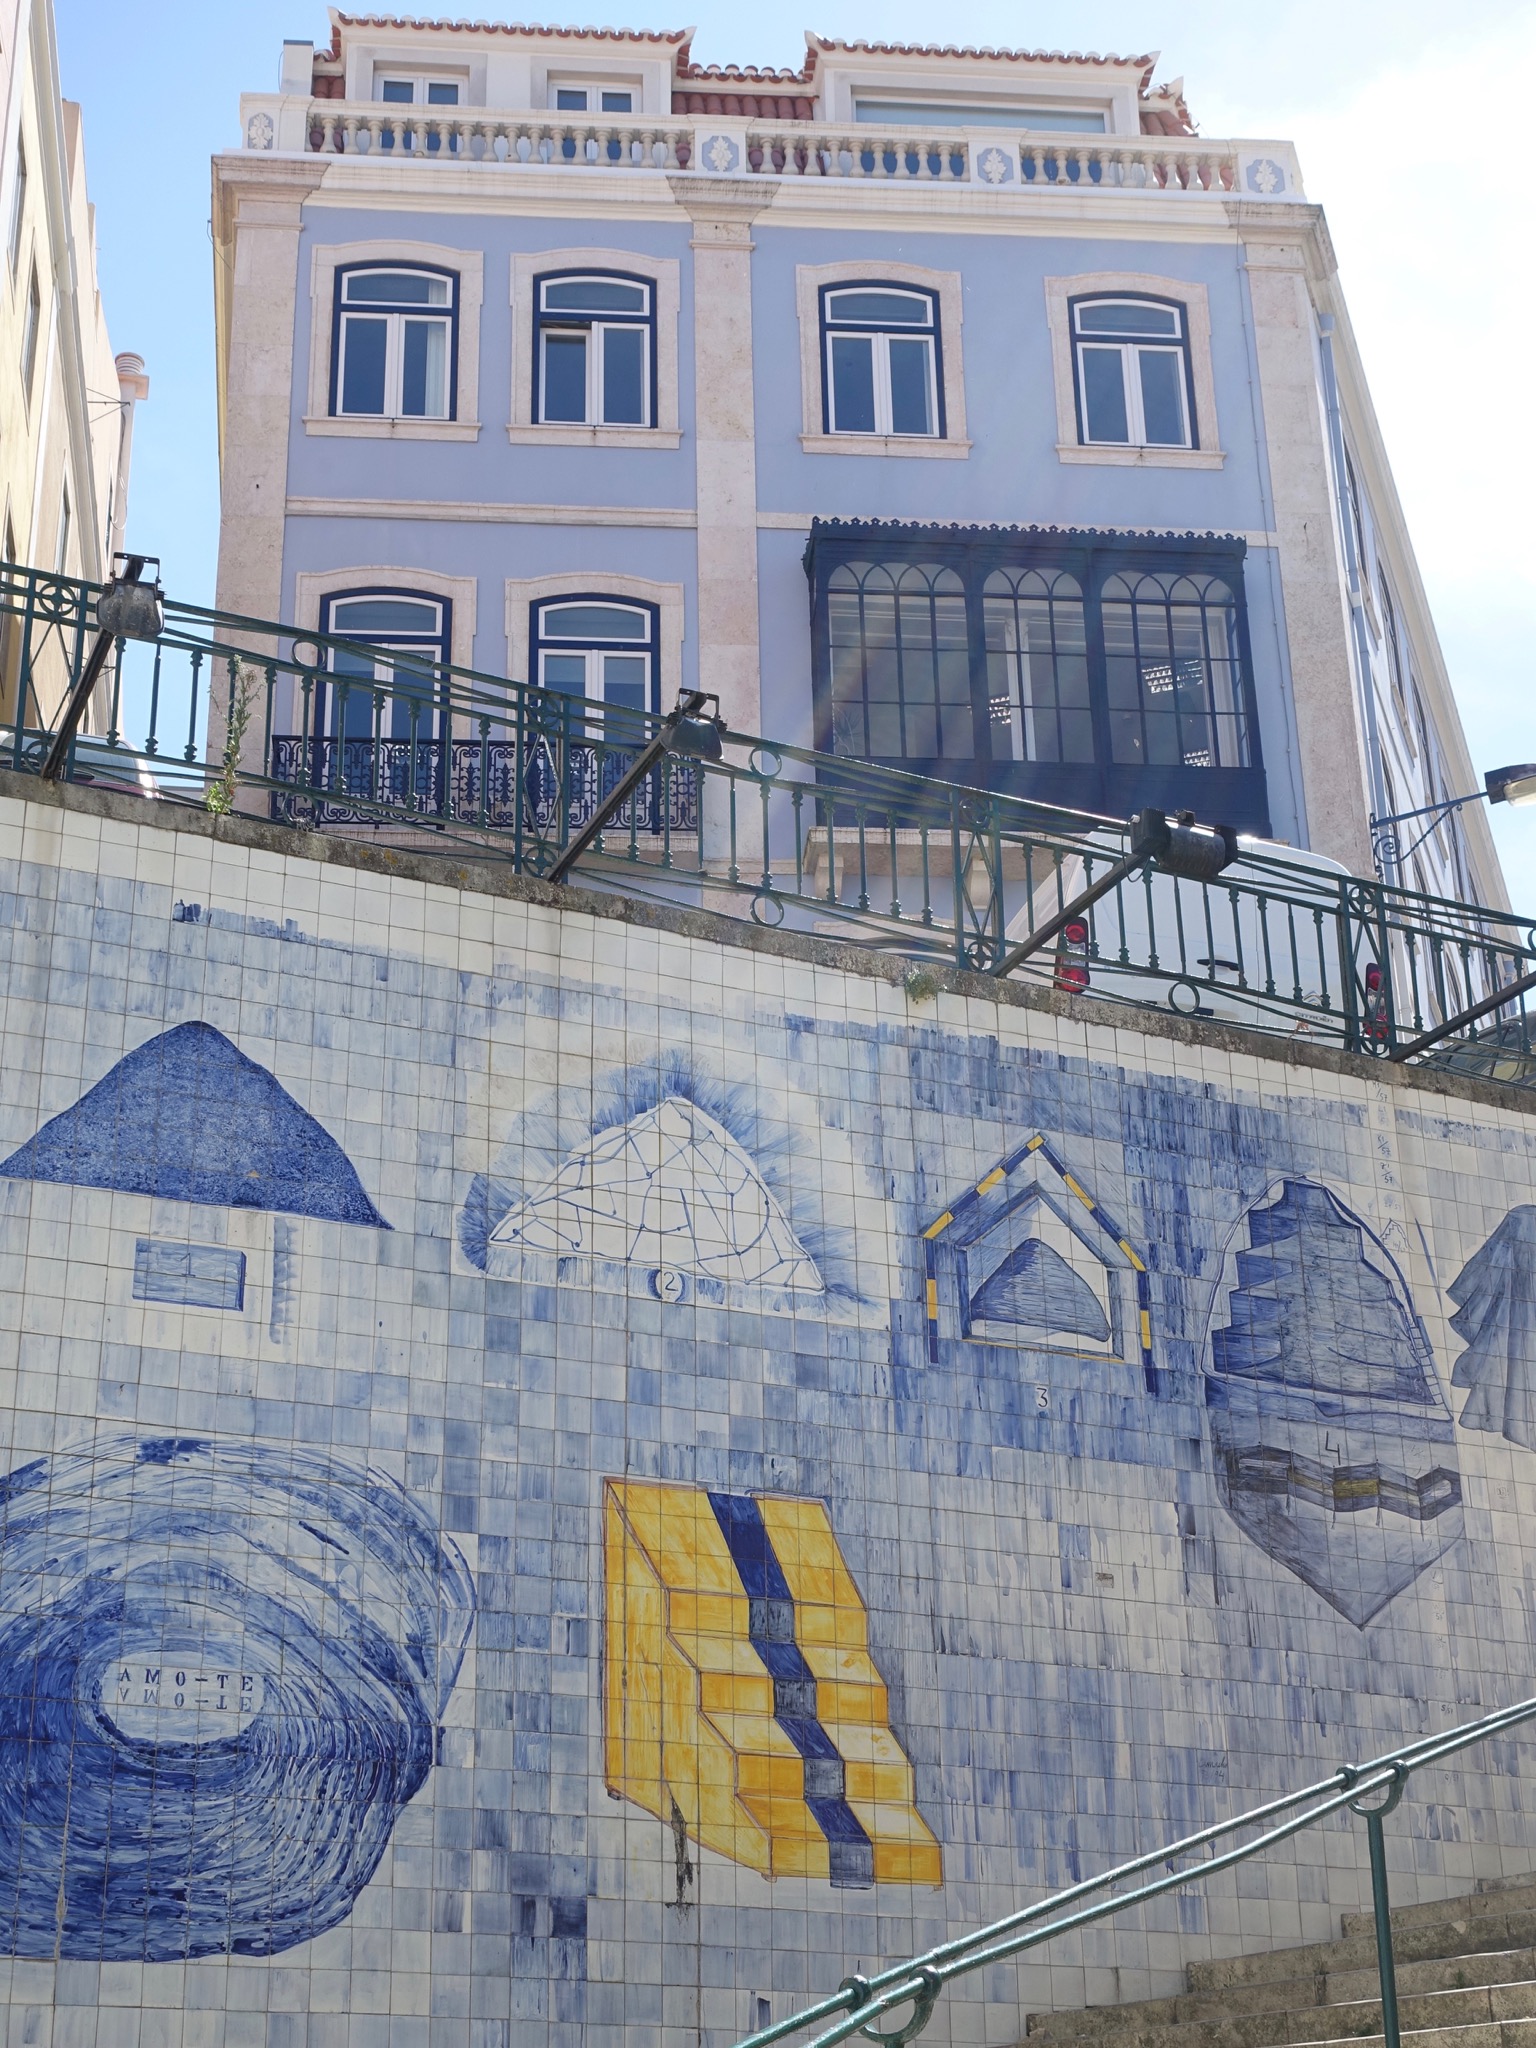 Photo 1 of 86 from the album Highlights Lisbon 2015.